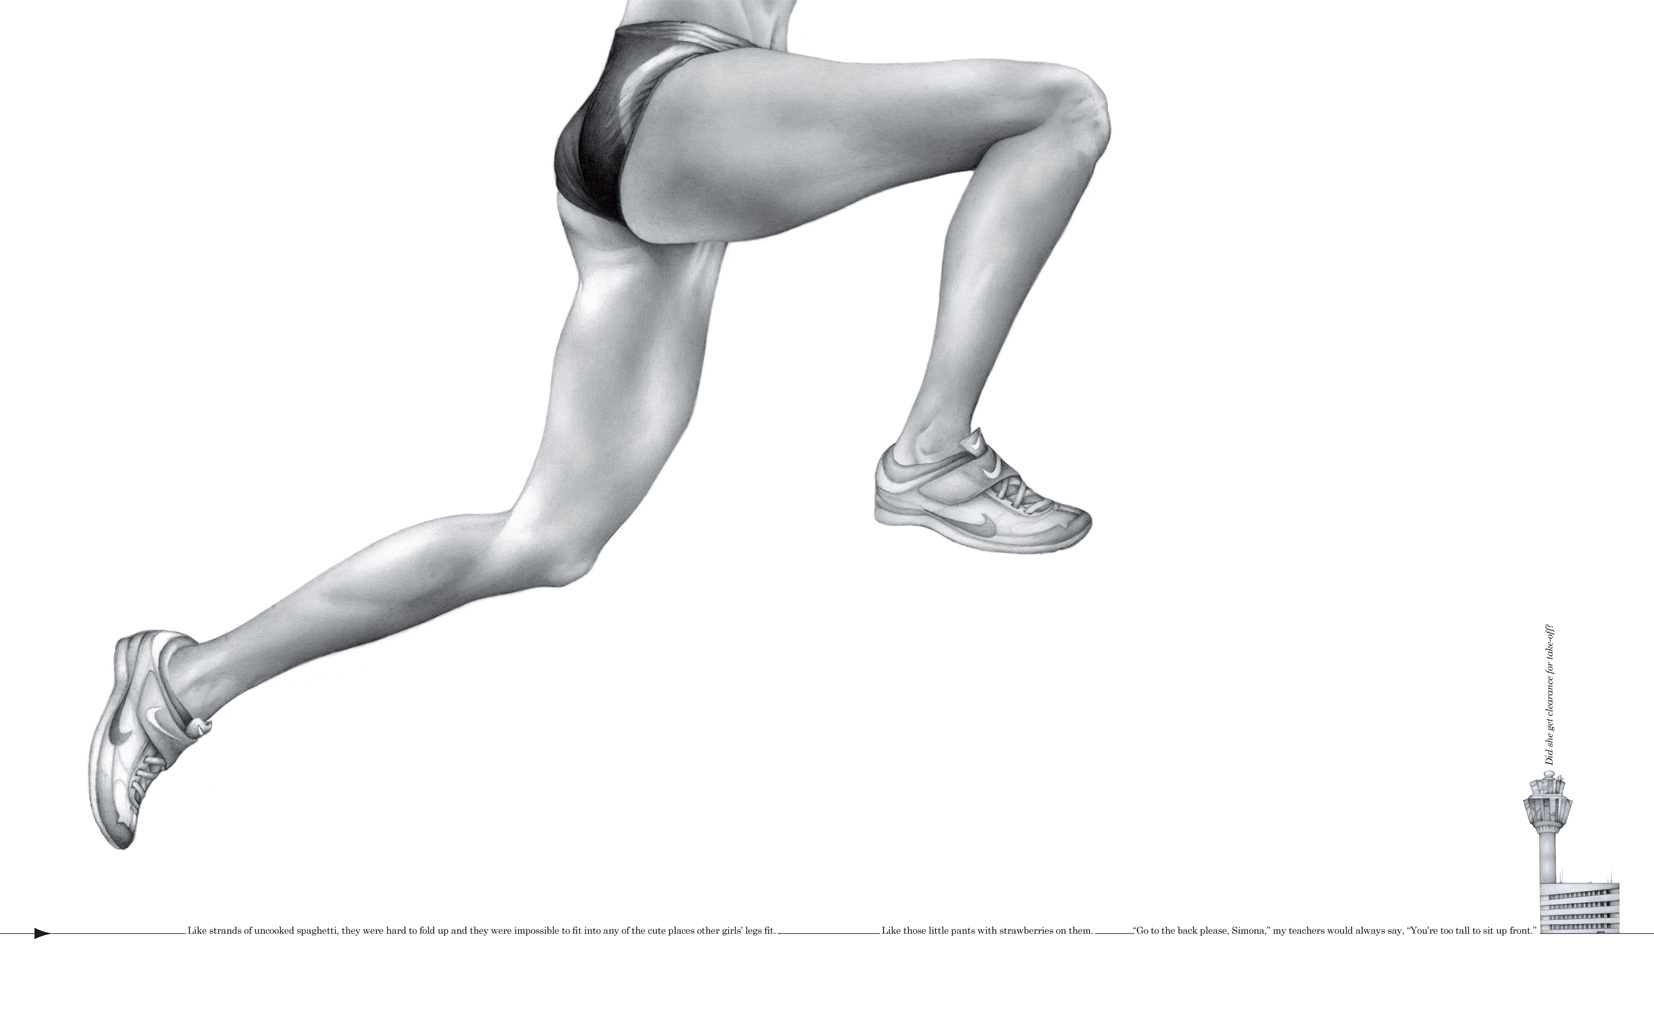 Nike Female Athlete Leaping Mid-air